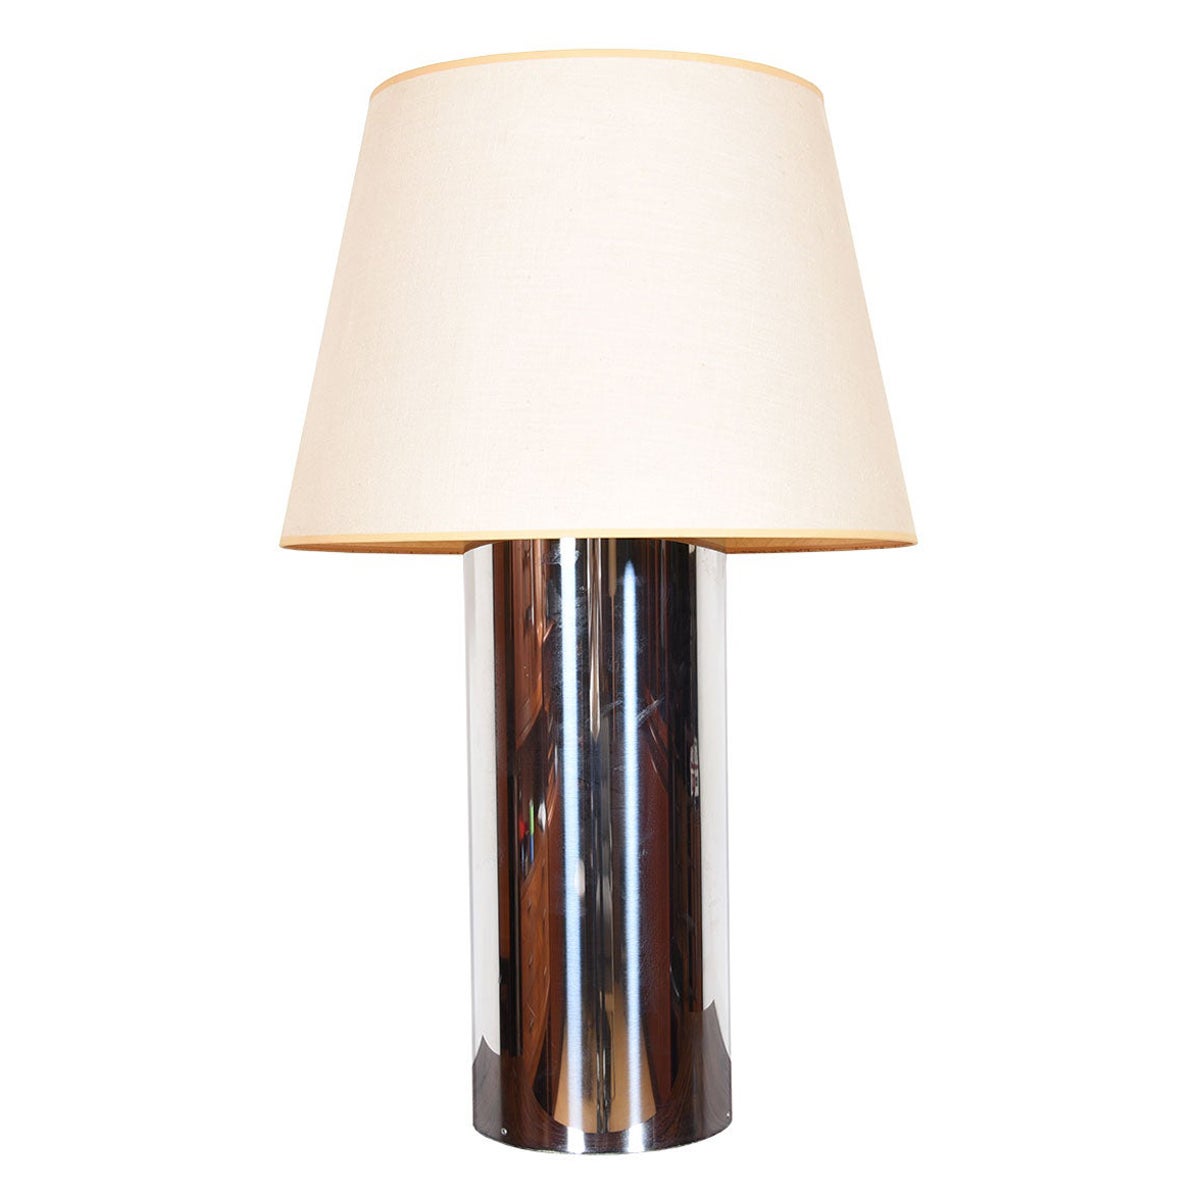 Midcentury Chrome Double-Socketed Table Lamp by Kovacs